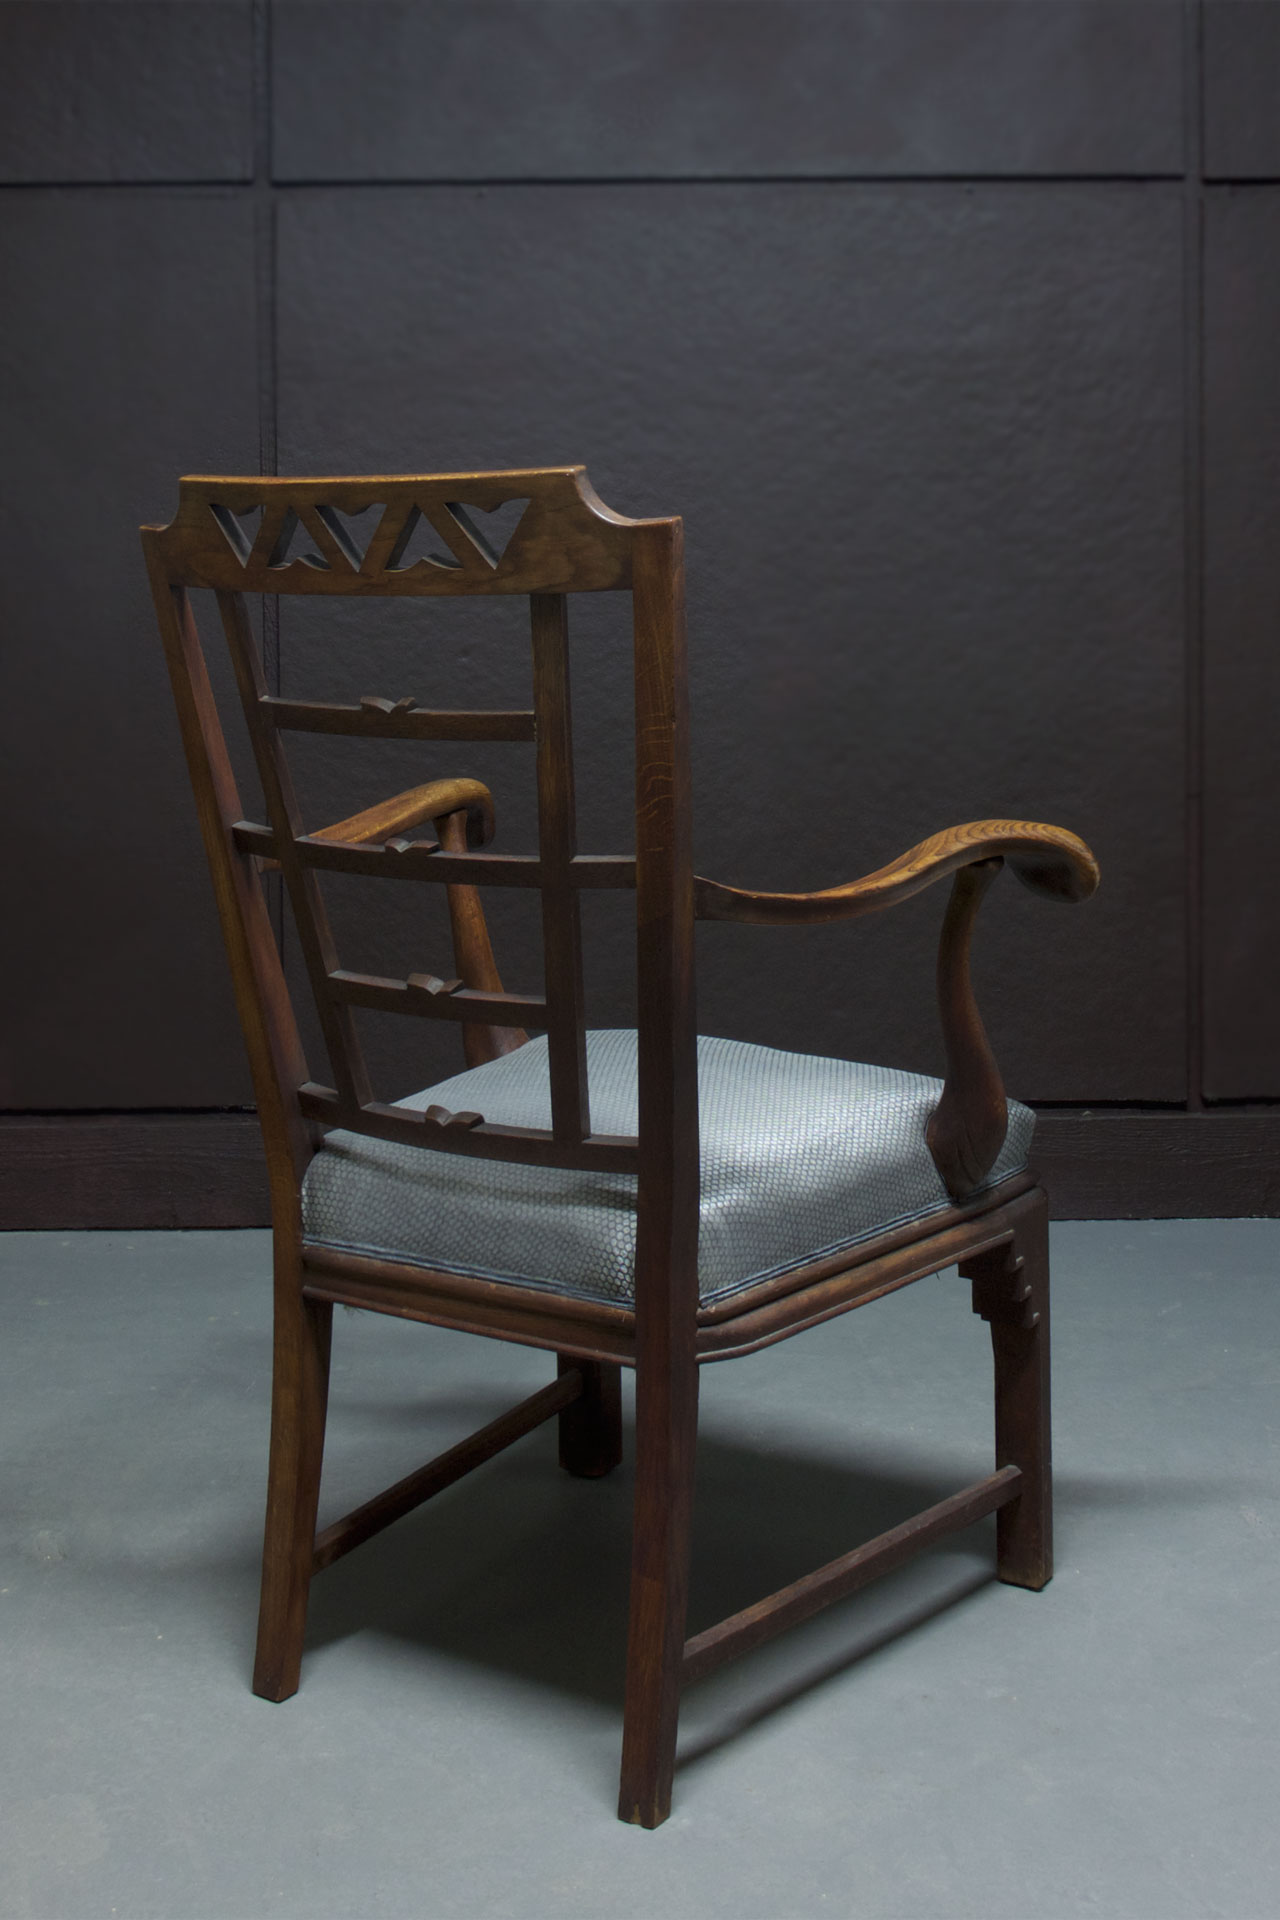 An Expressionist Rococo armchair